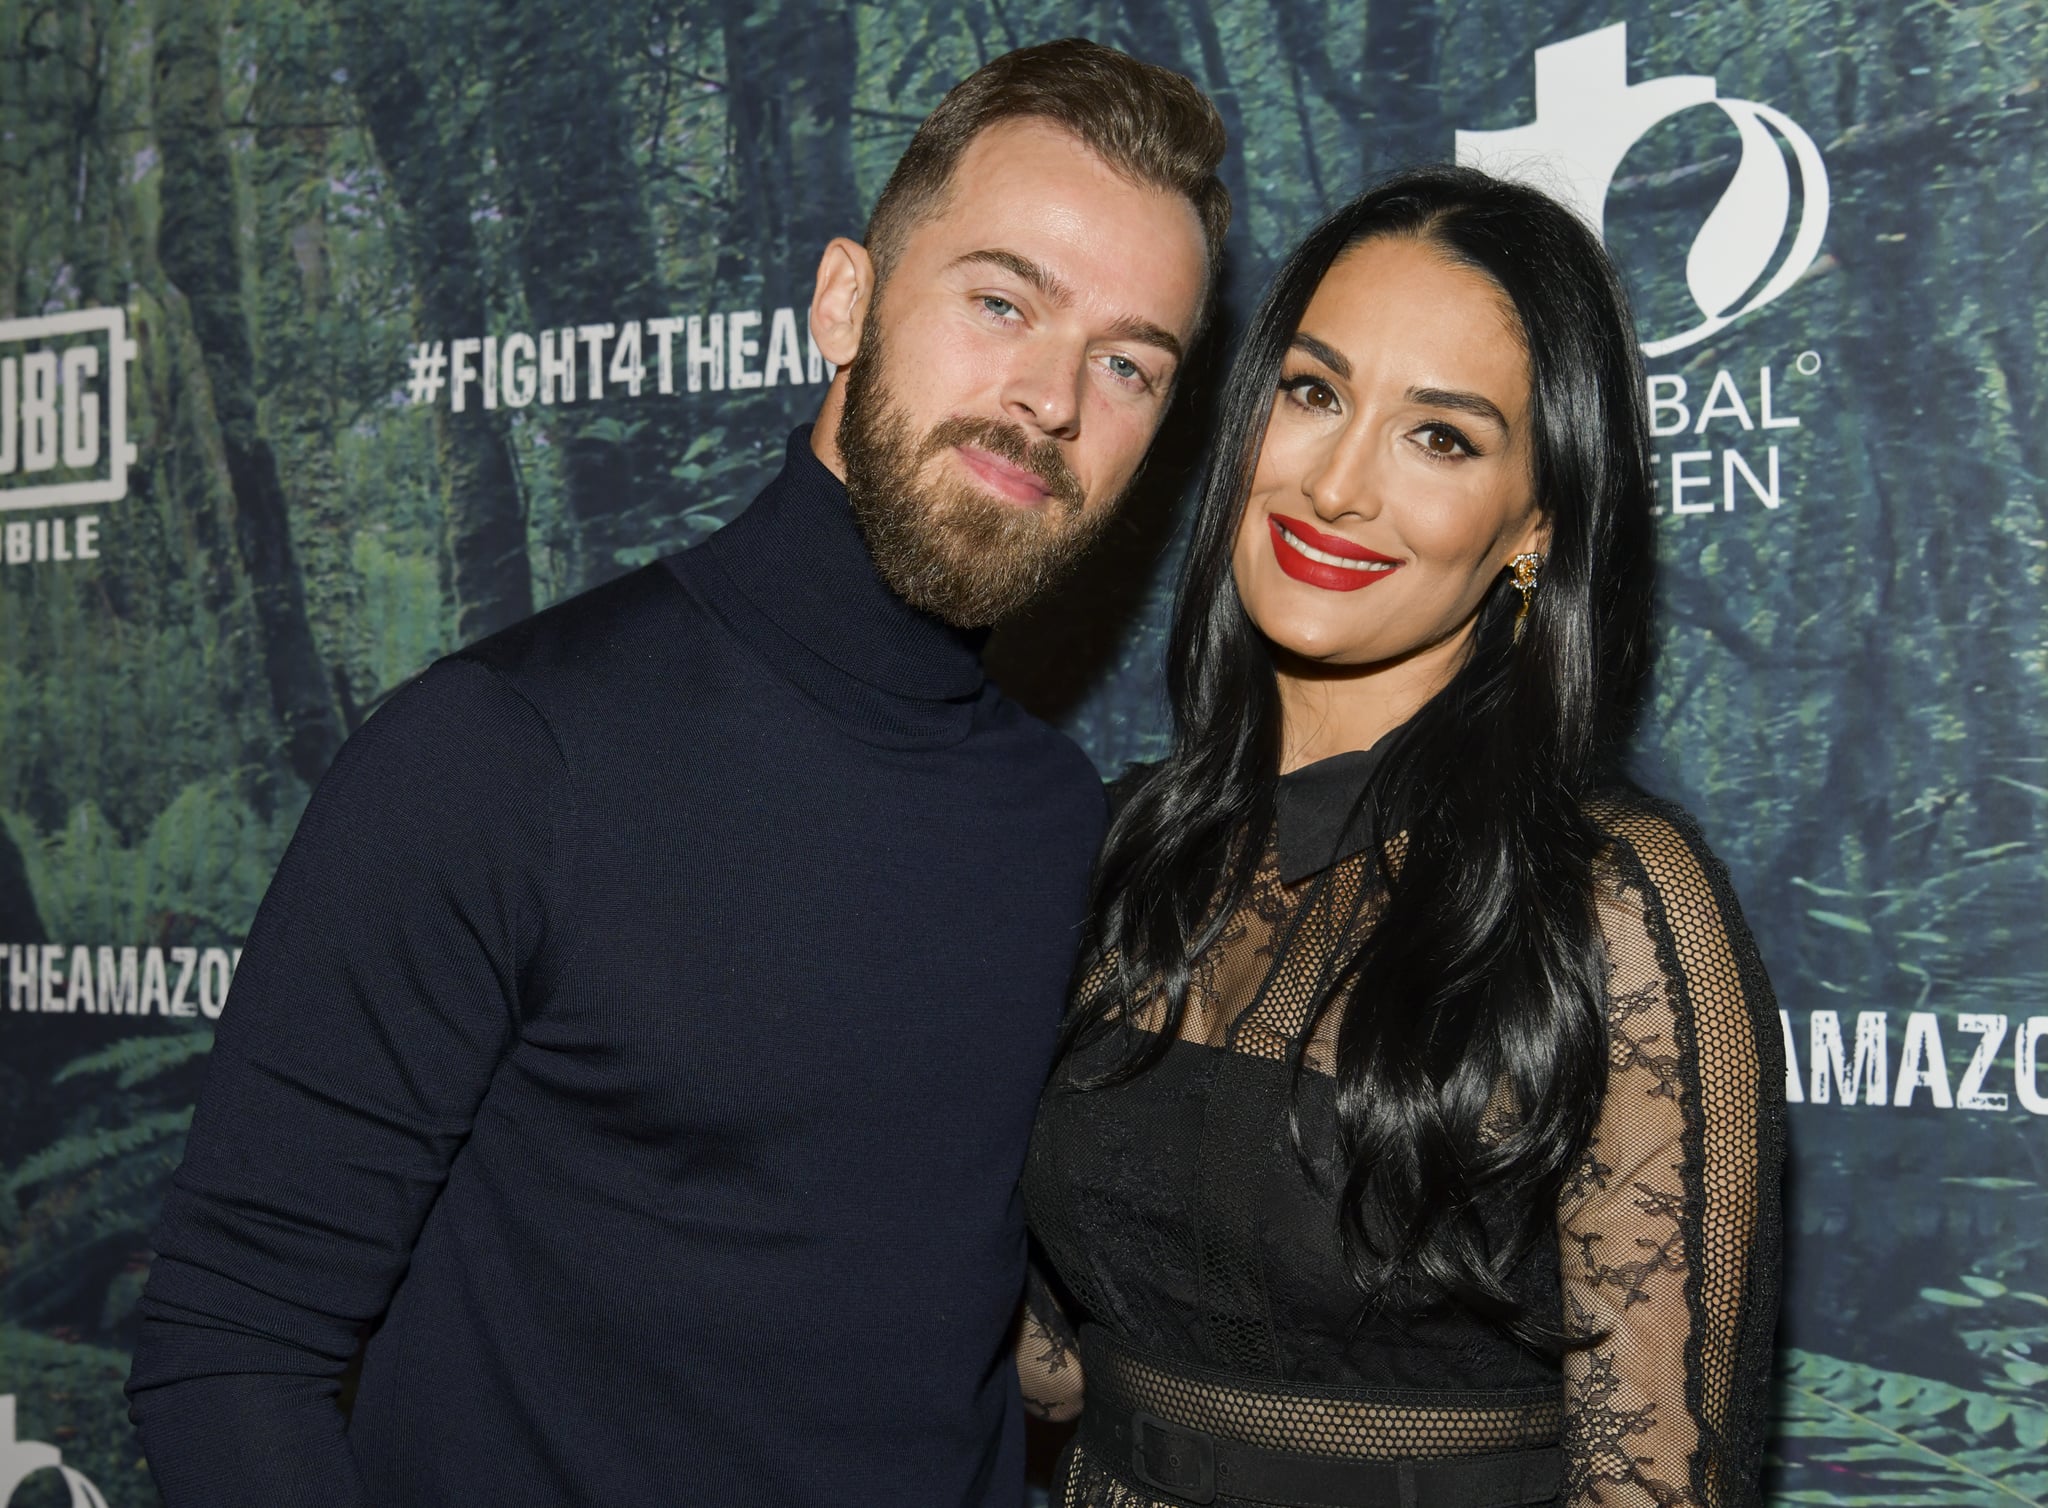 LOS ANGELES, CALIFORNIA - DECEMBER 09: Artem Chigvintsev (L) and Nikki Bella attend the PUBG Mobile's #FIGHT4THEAMAZON Event at Avalon Hollywood on December 09, 2019 in Los Angeles, California. (Photo by Rodin Eckenroth/Getty Images)